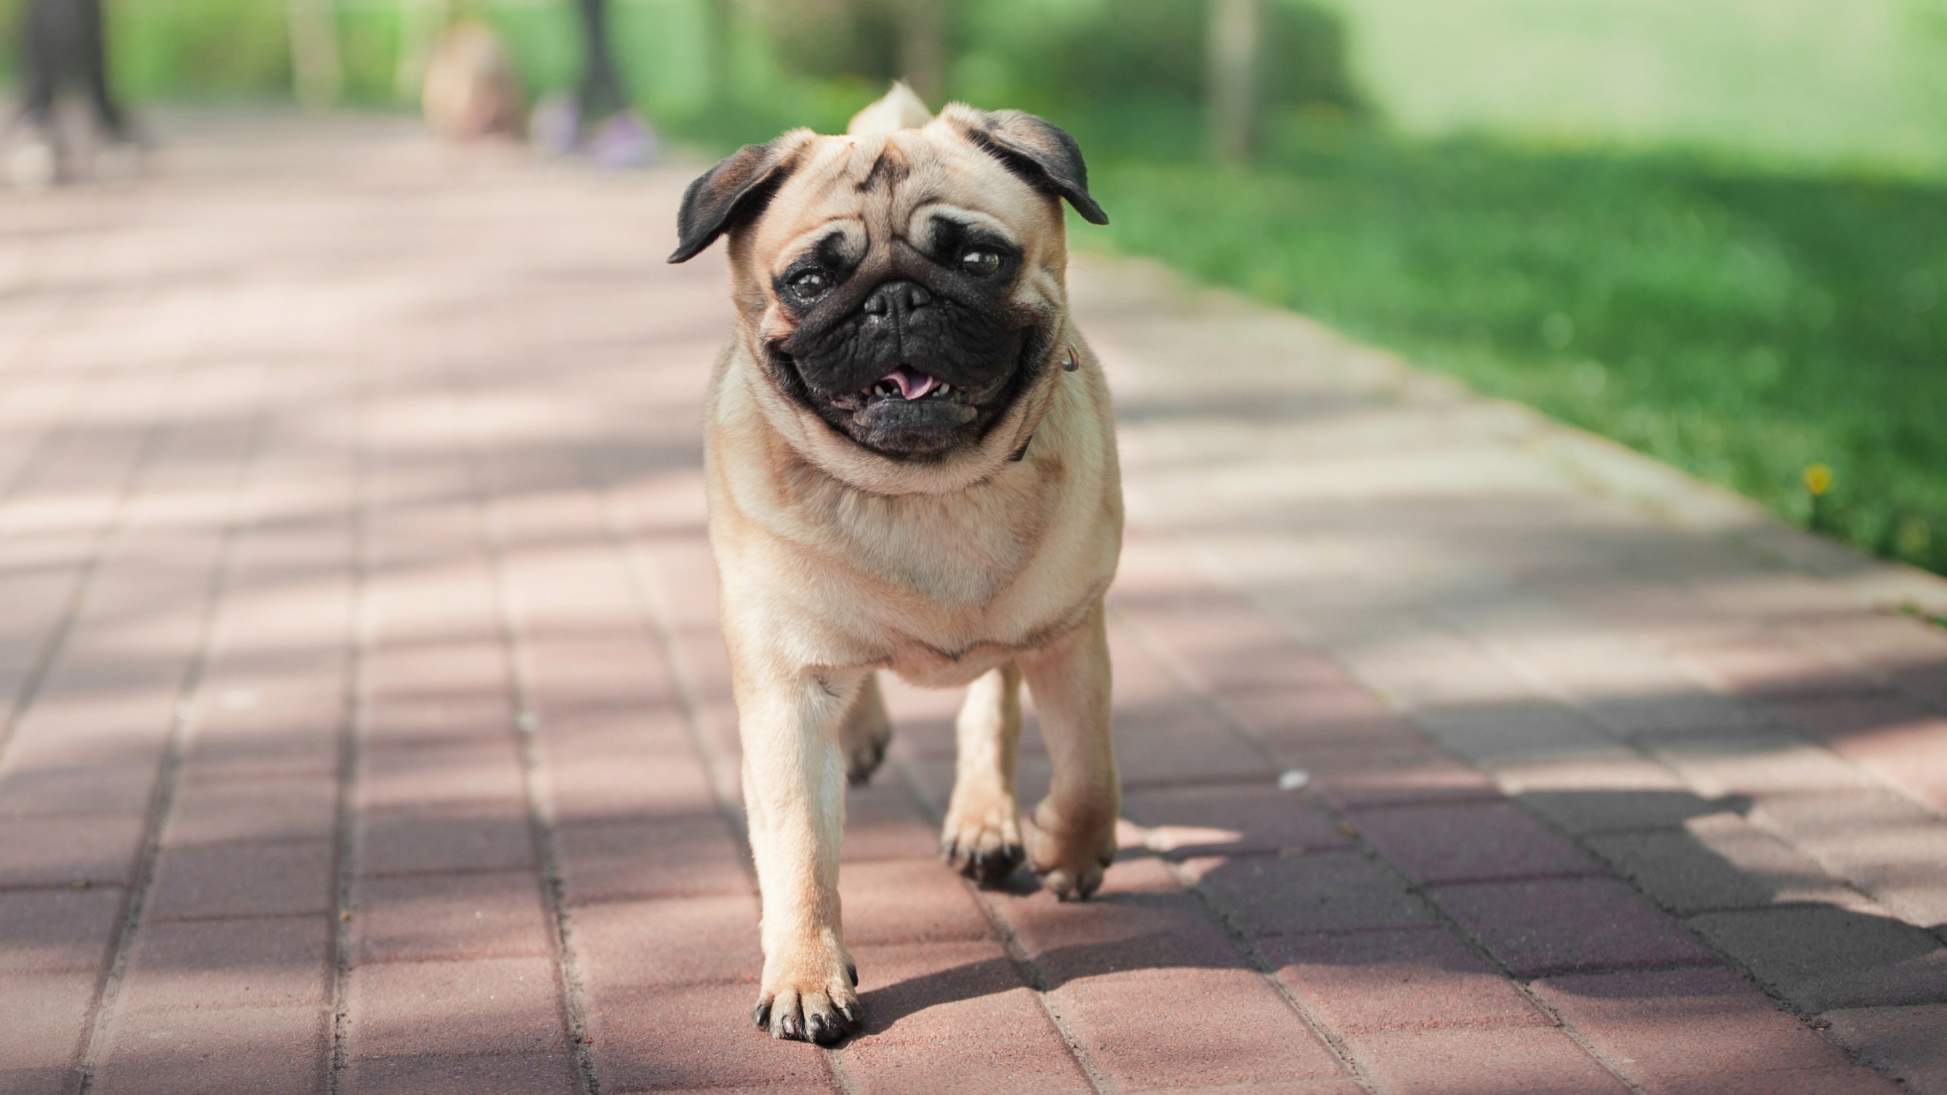 7 Dog Breeds That Are Perfect For City Life